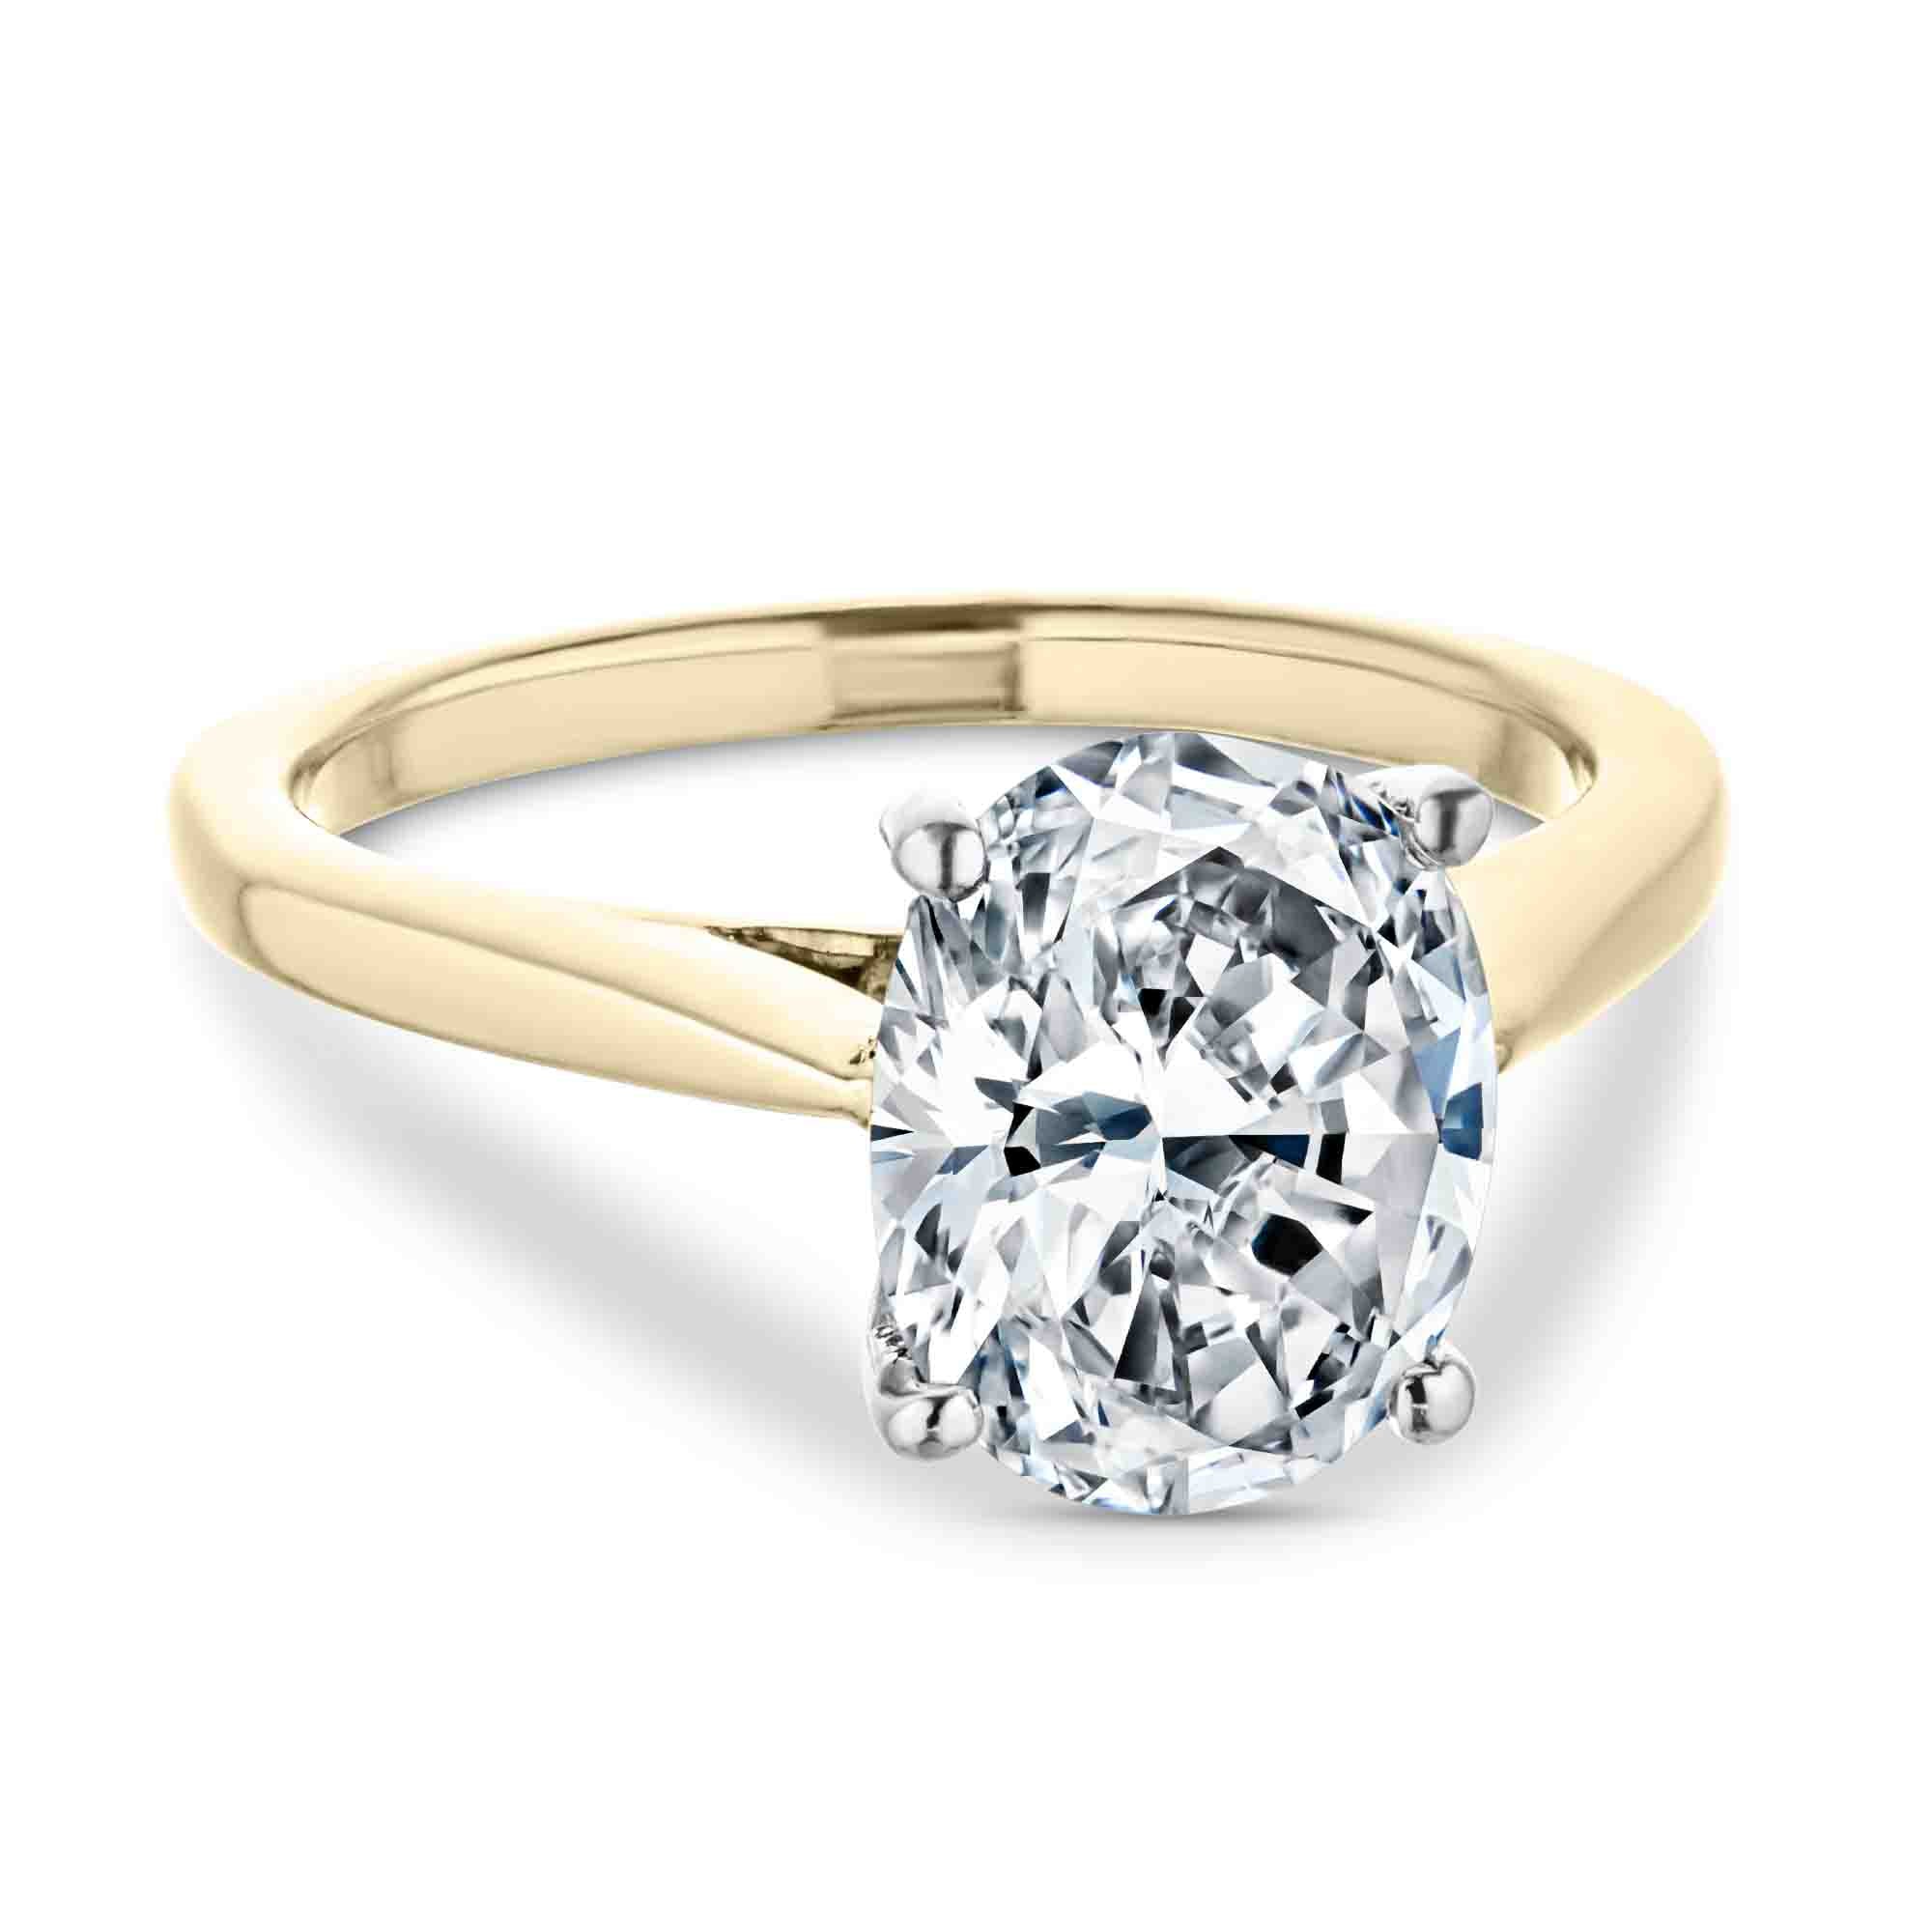 Shown with 2ct Oval Cut Lab Grown Diamond in 14k Yellow Gold and 14K White Gold|Two tone hidden halo engagement ring with 2ct oval cut lab grown diamond in 14k yellow gold and 14k white gold